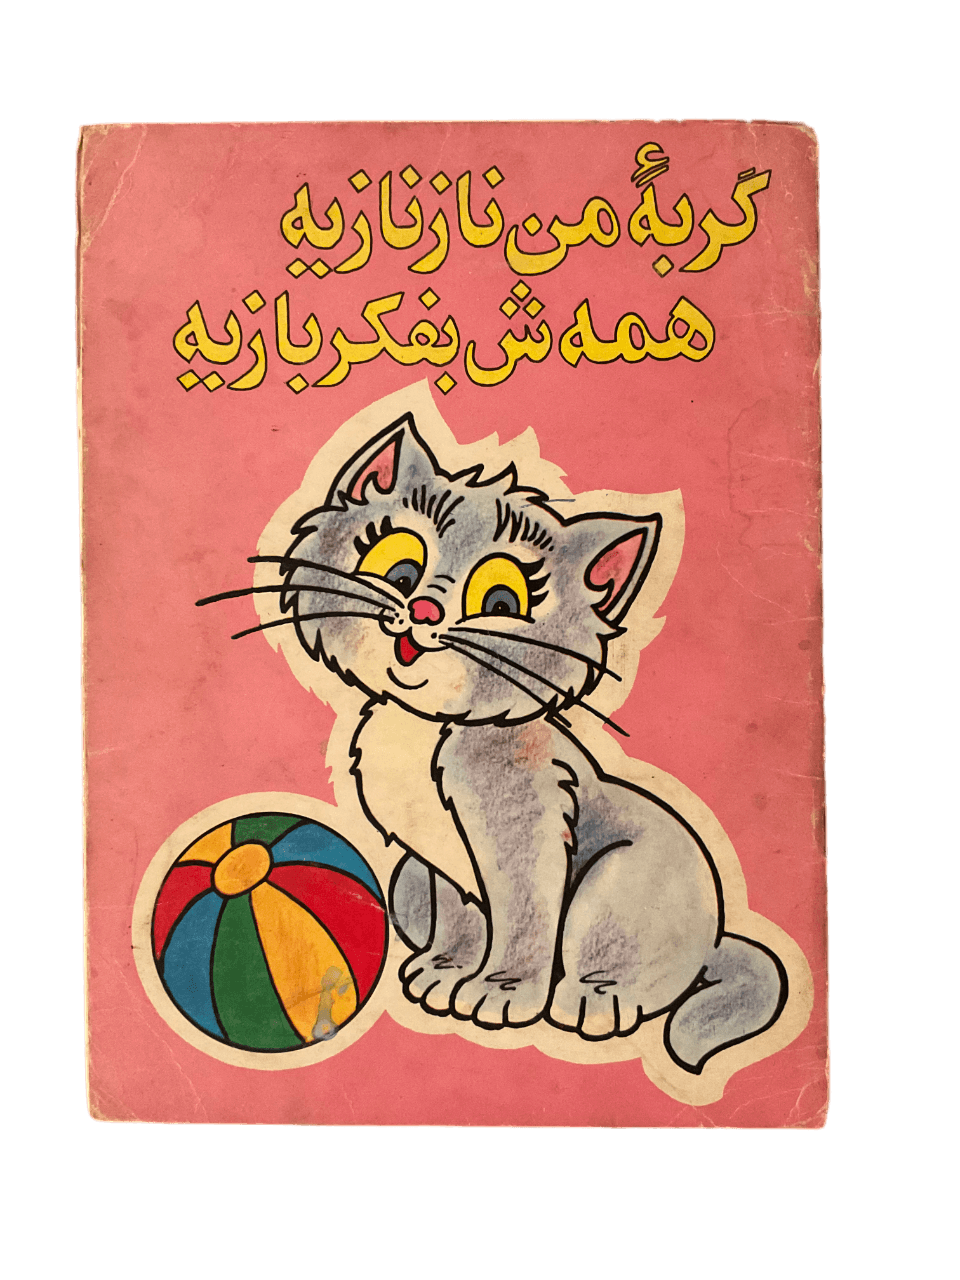 My Cat is Cute, All She Thinks of is Playing (Farsi) - KHAJISTAN™